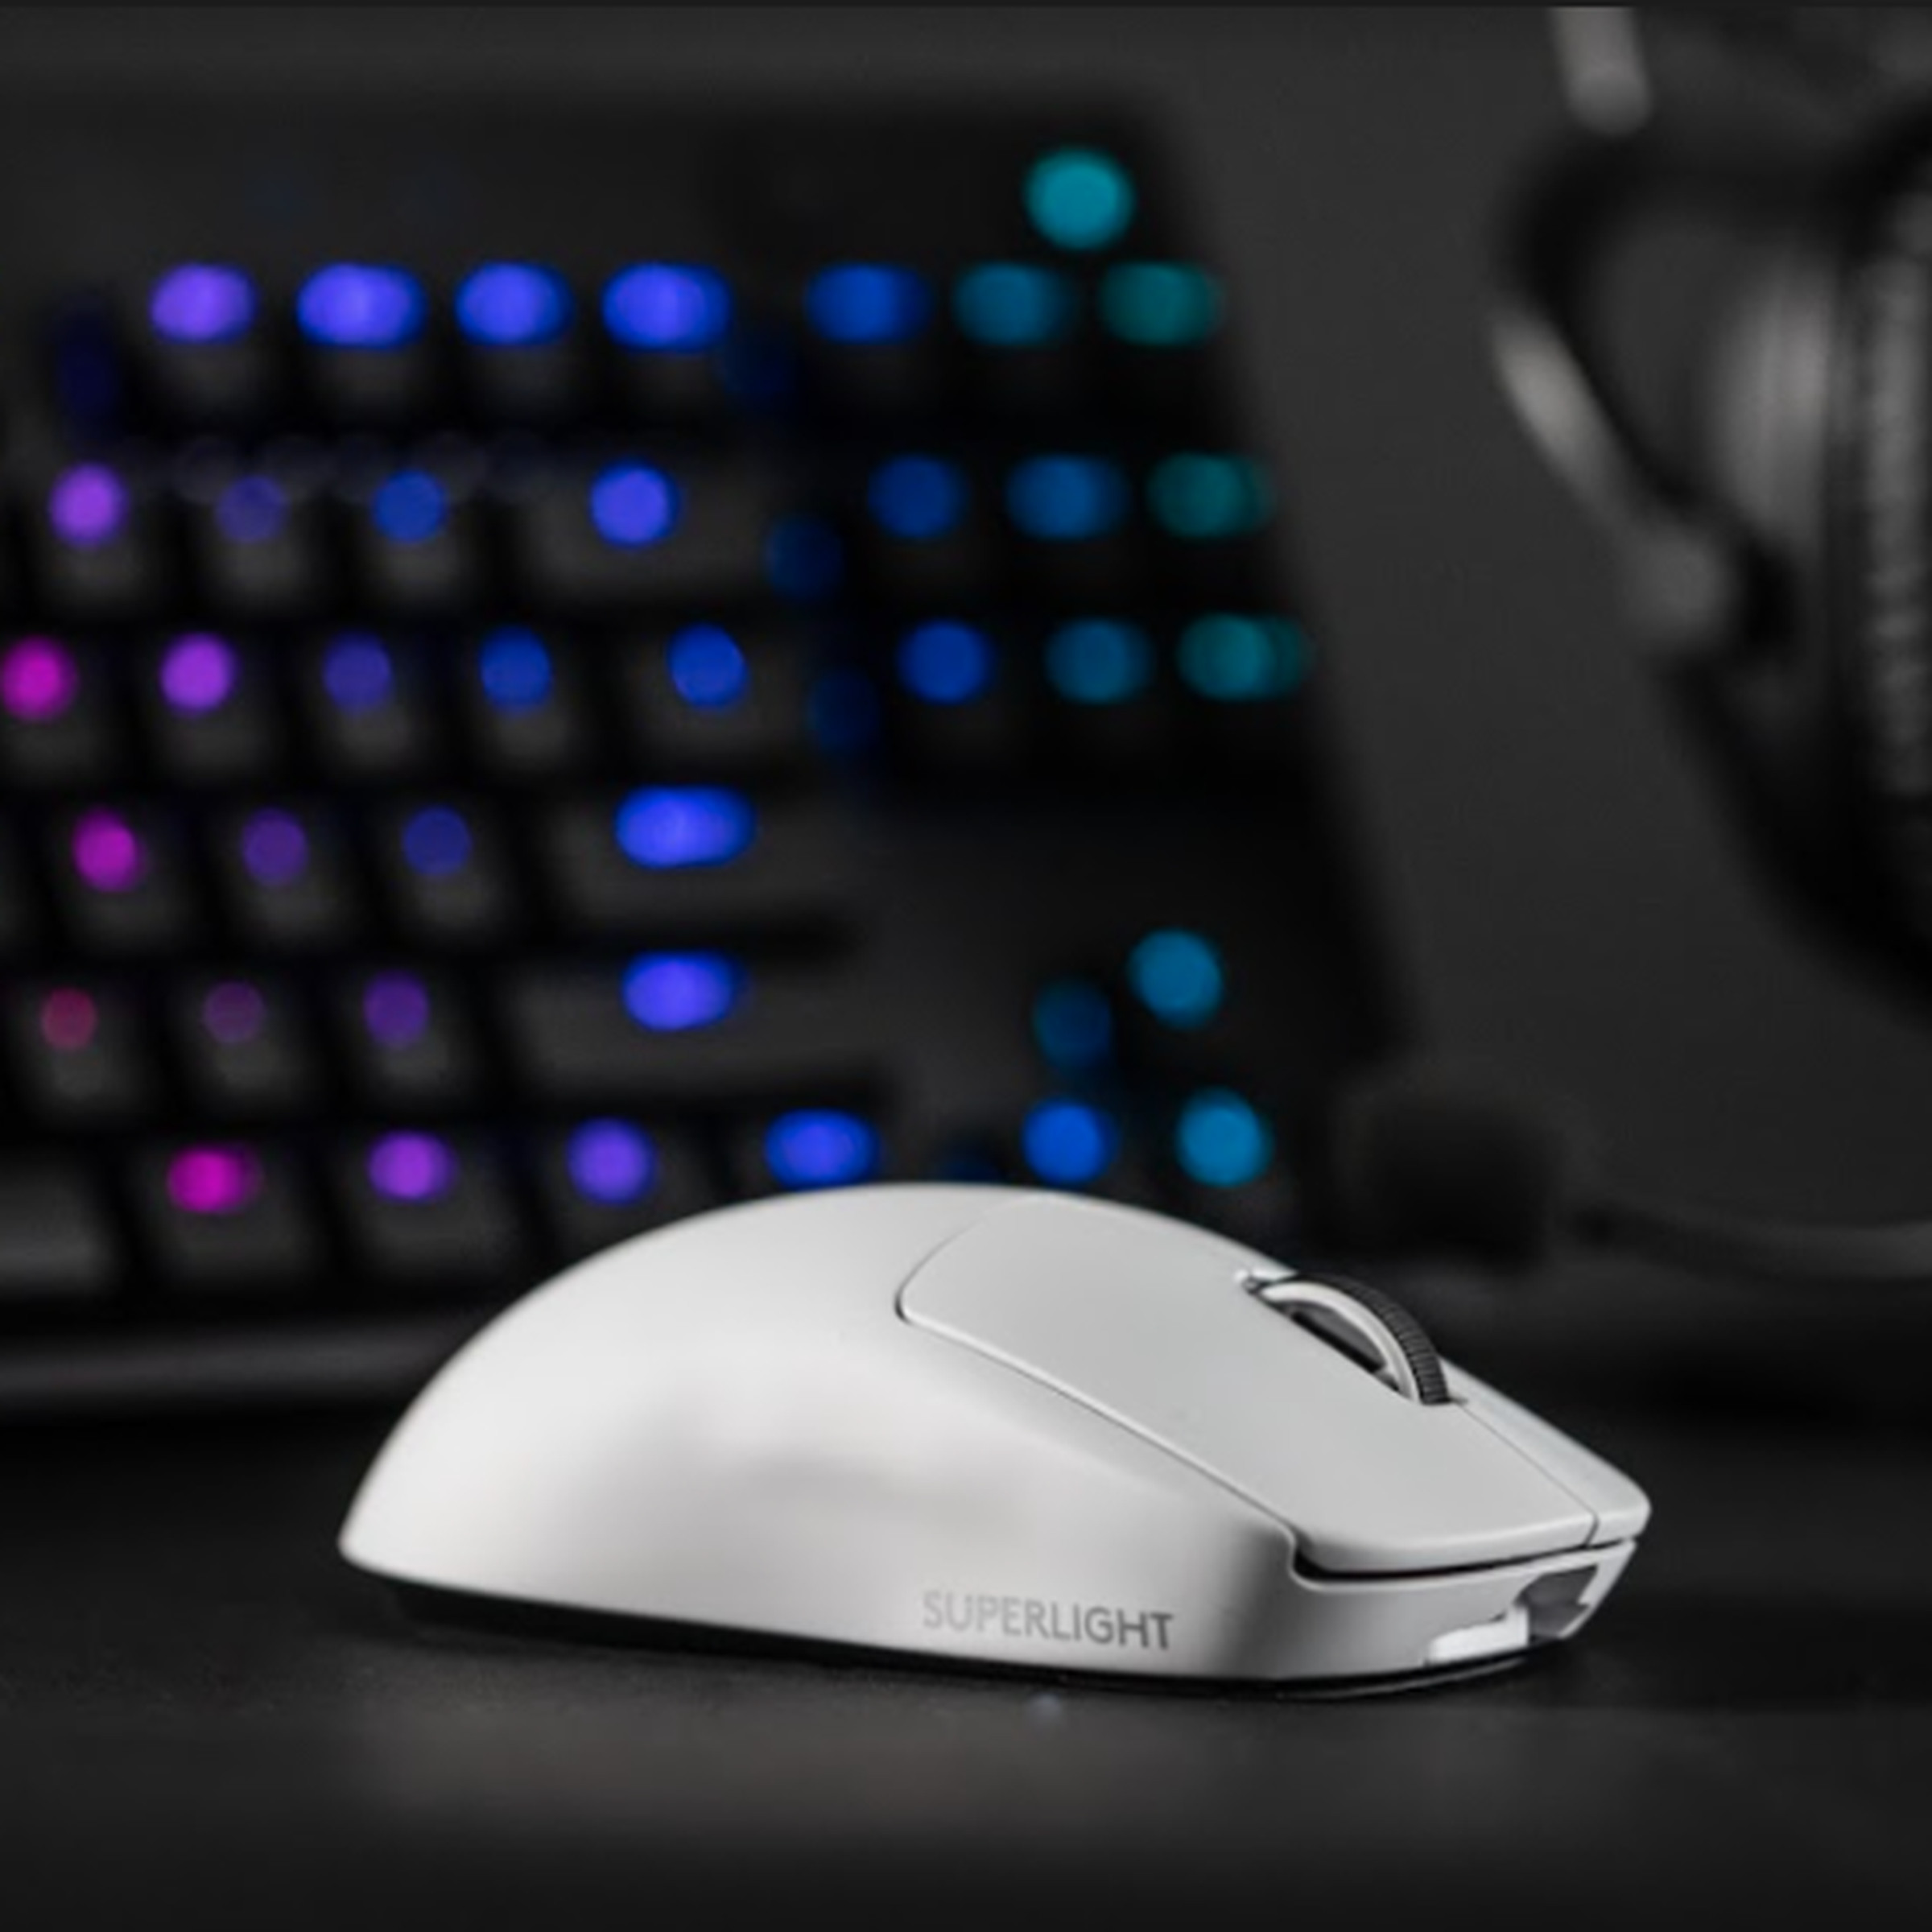 A close-up image of Logitech’s white G Pro X Superlight mouse in front of a headset and an RGB keyboard.